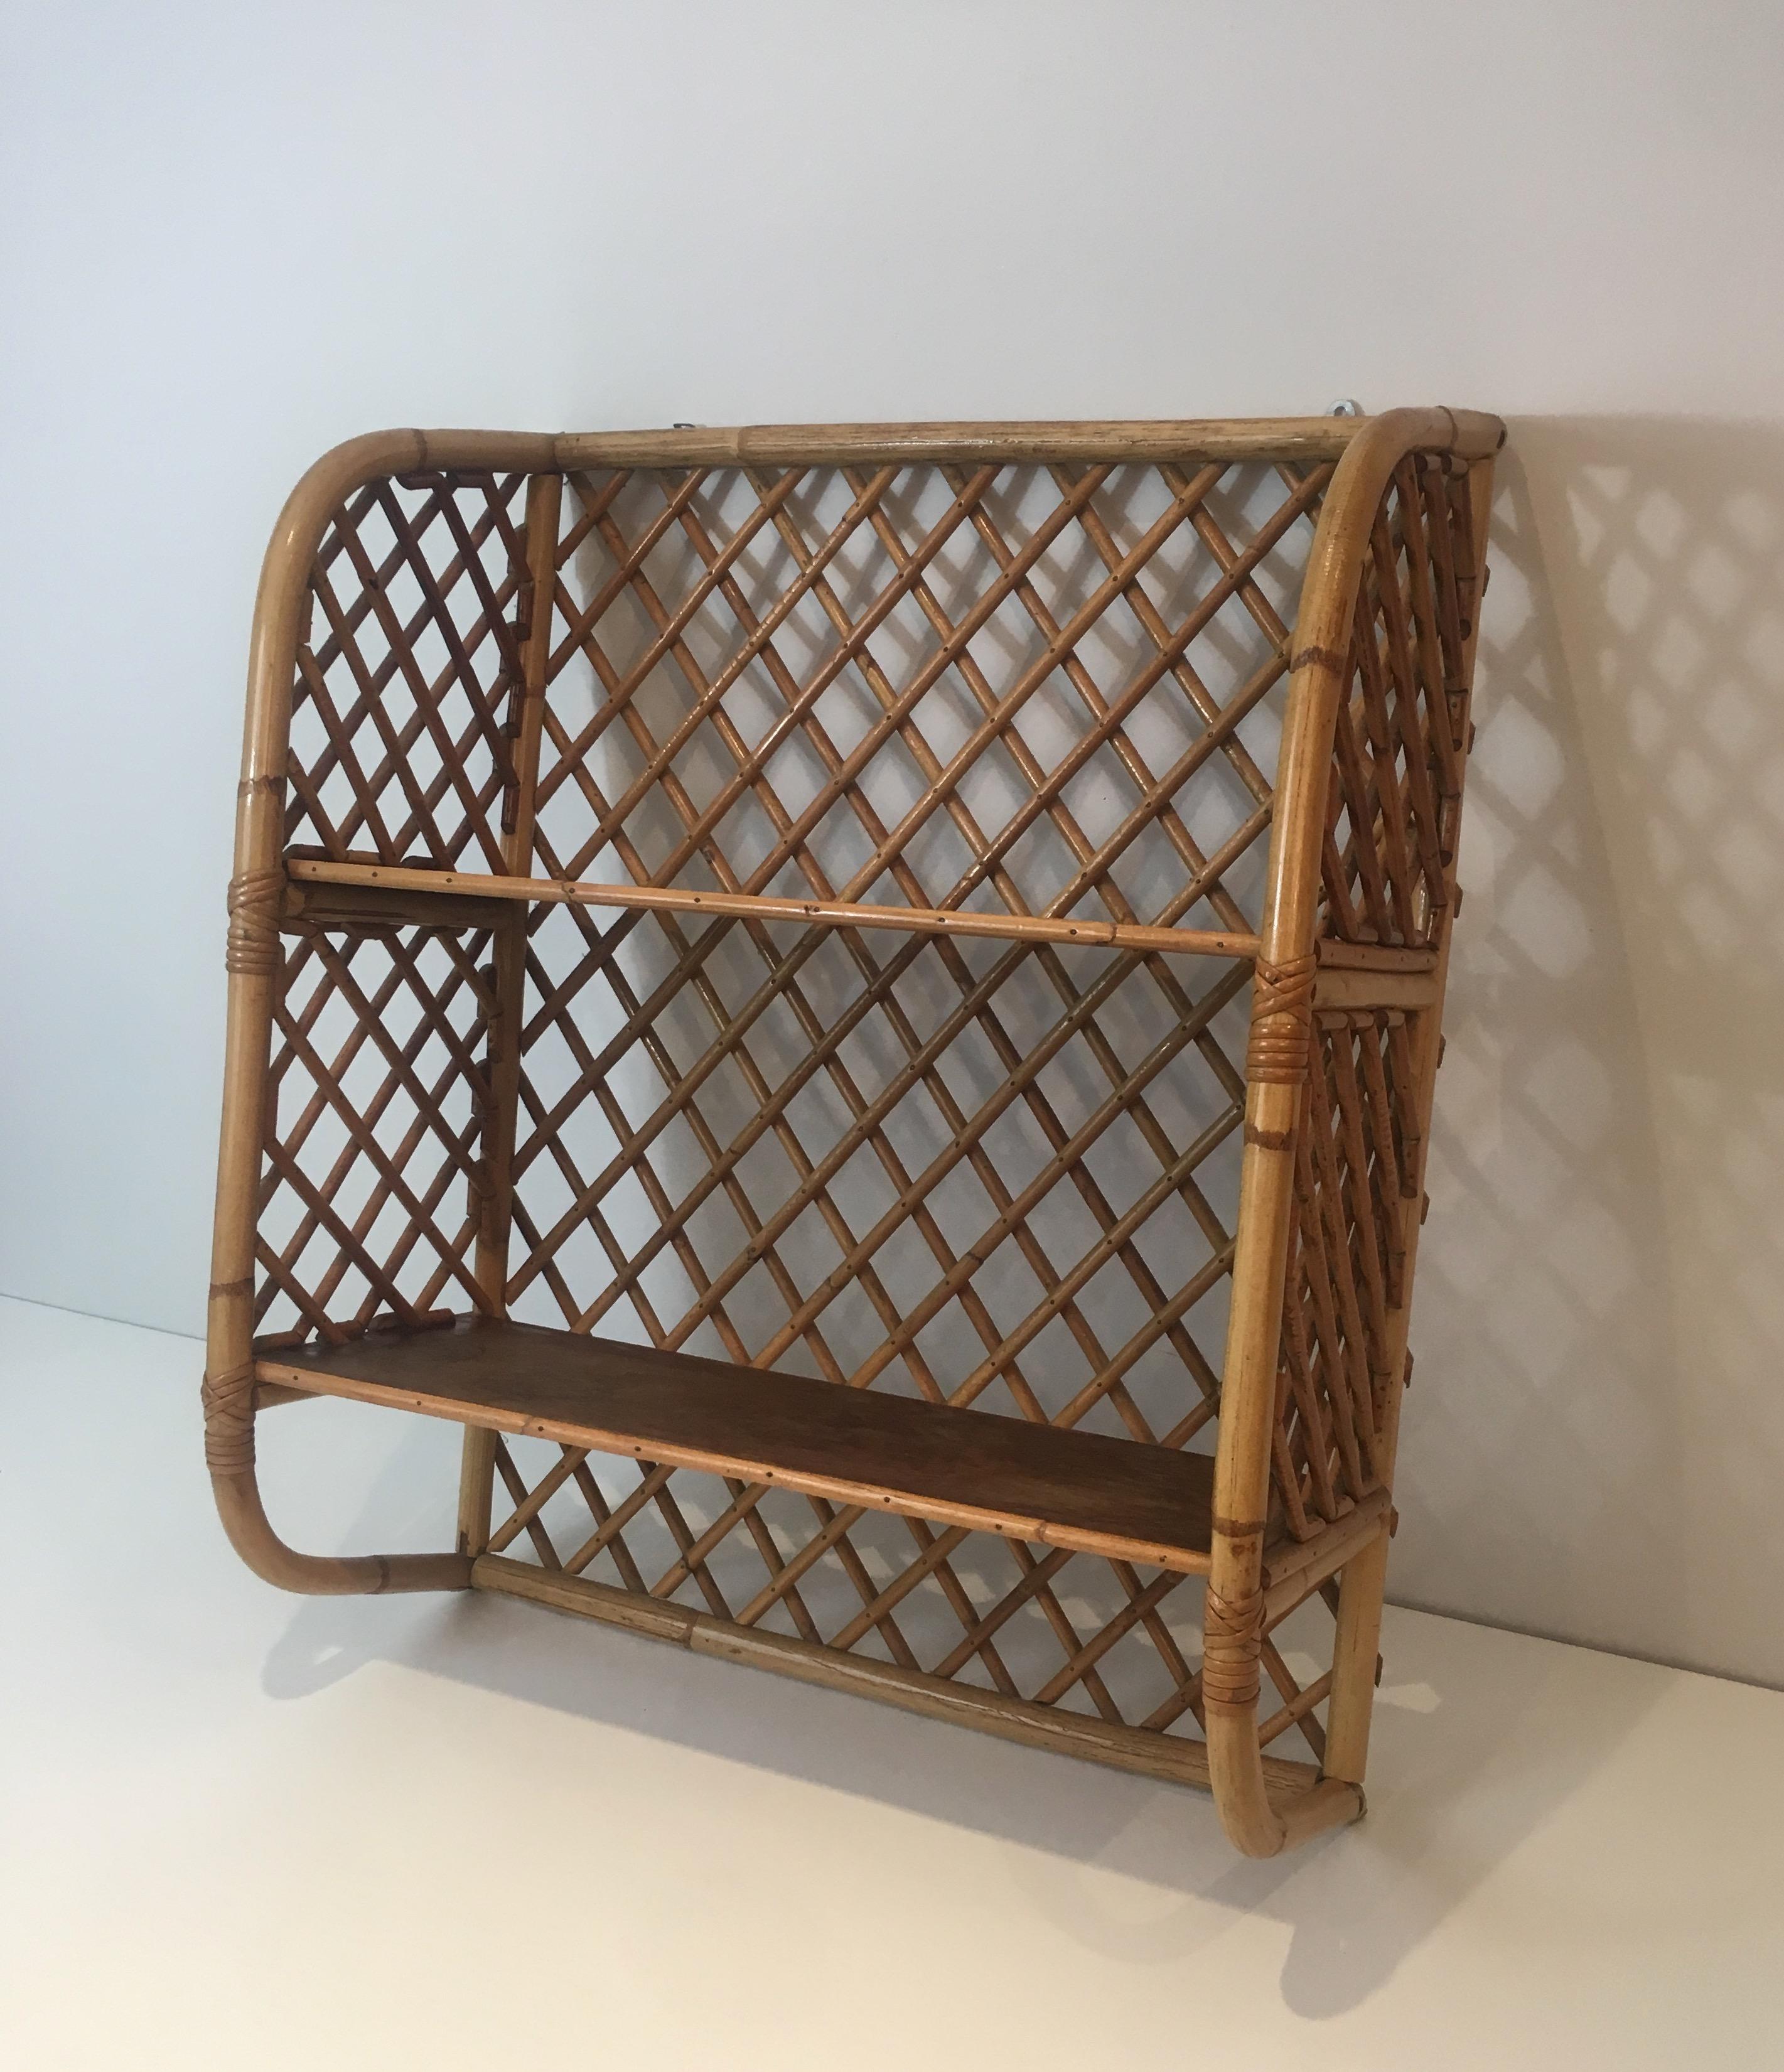 Attributed to Audoux Minet, Rattan and Wood Wall Shelves, French, circa 1950 For Sale 15